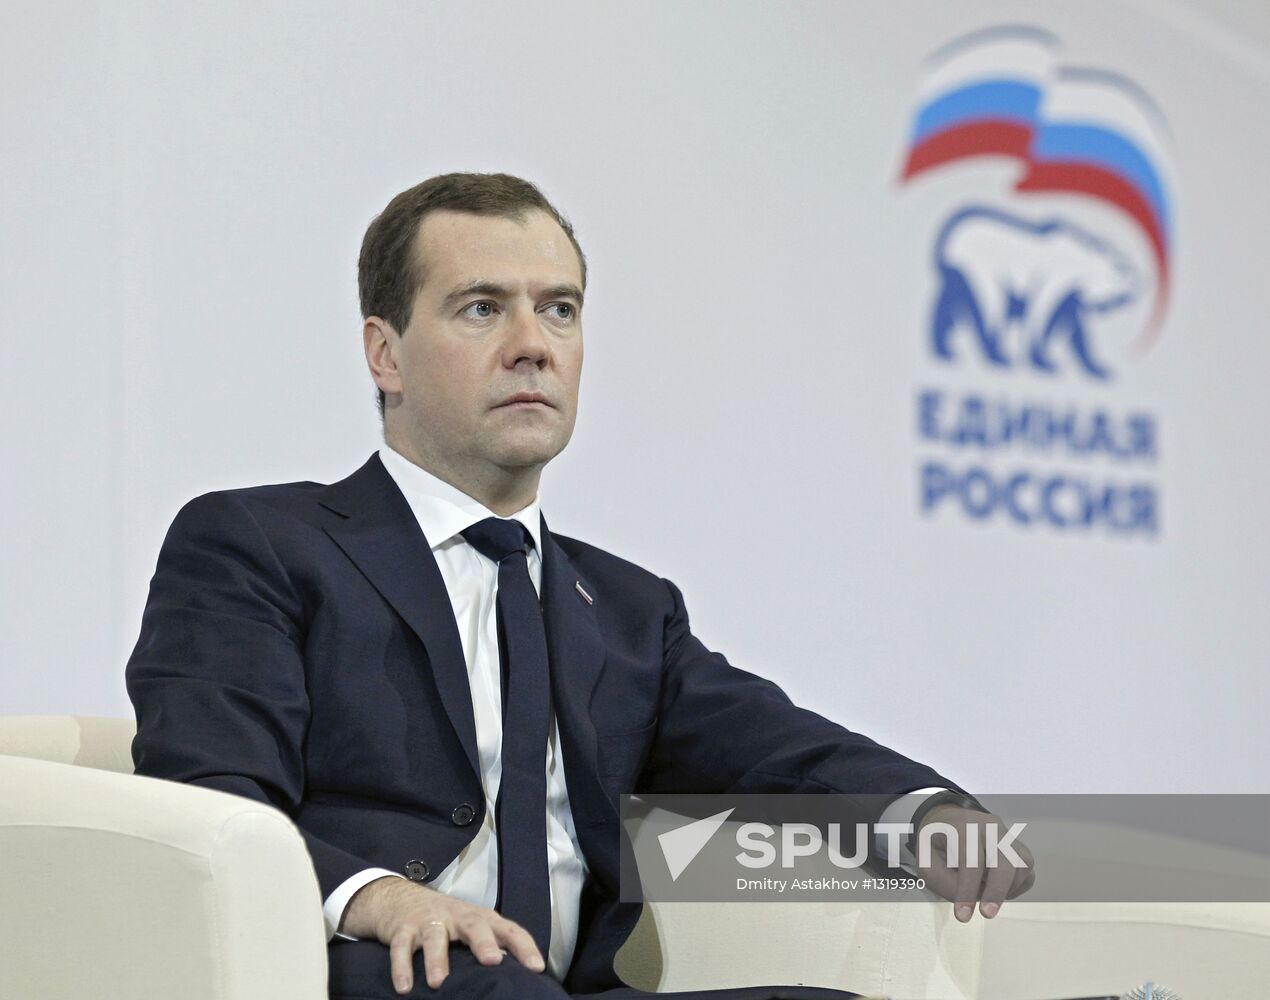 Dmitry Medvedev at expanded meeting of United Russia councils